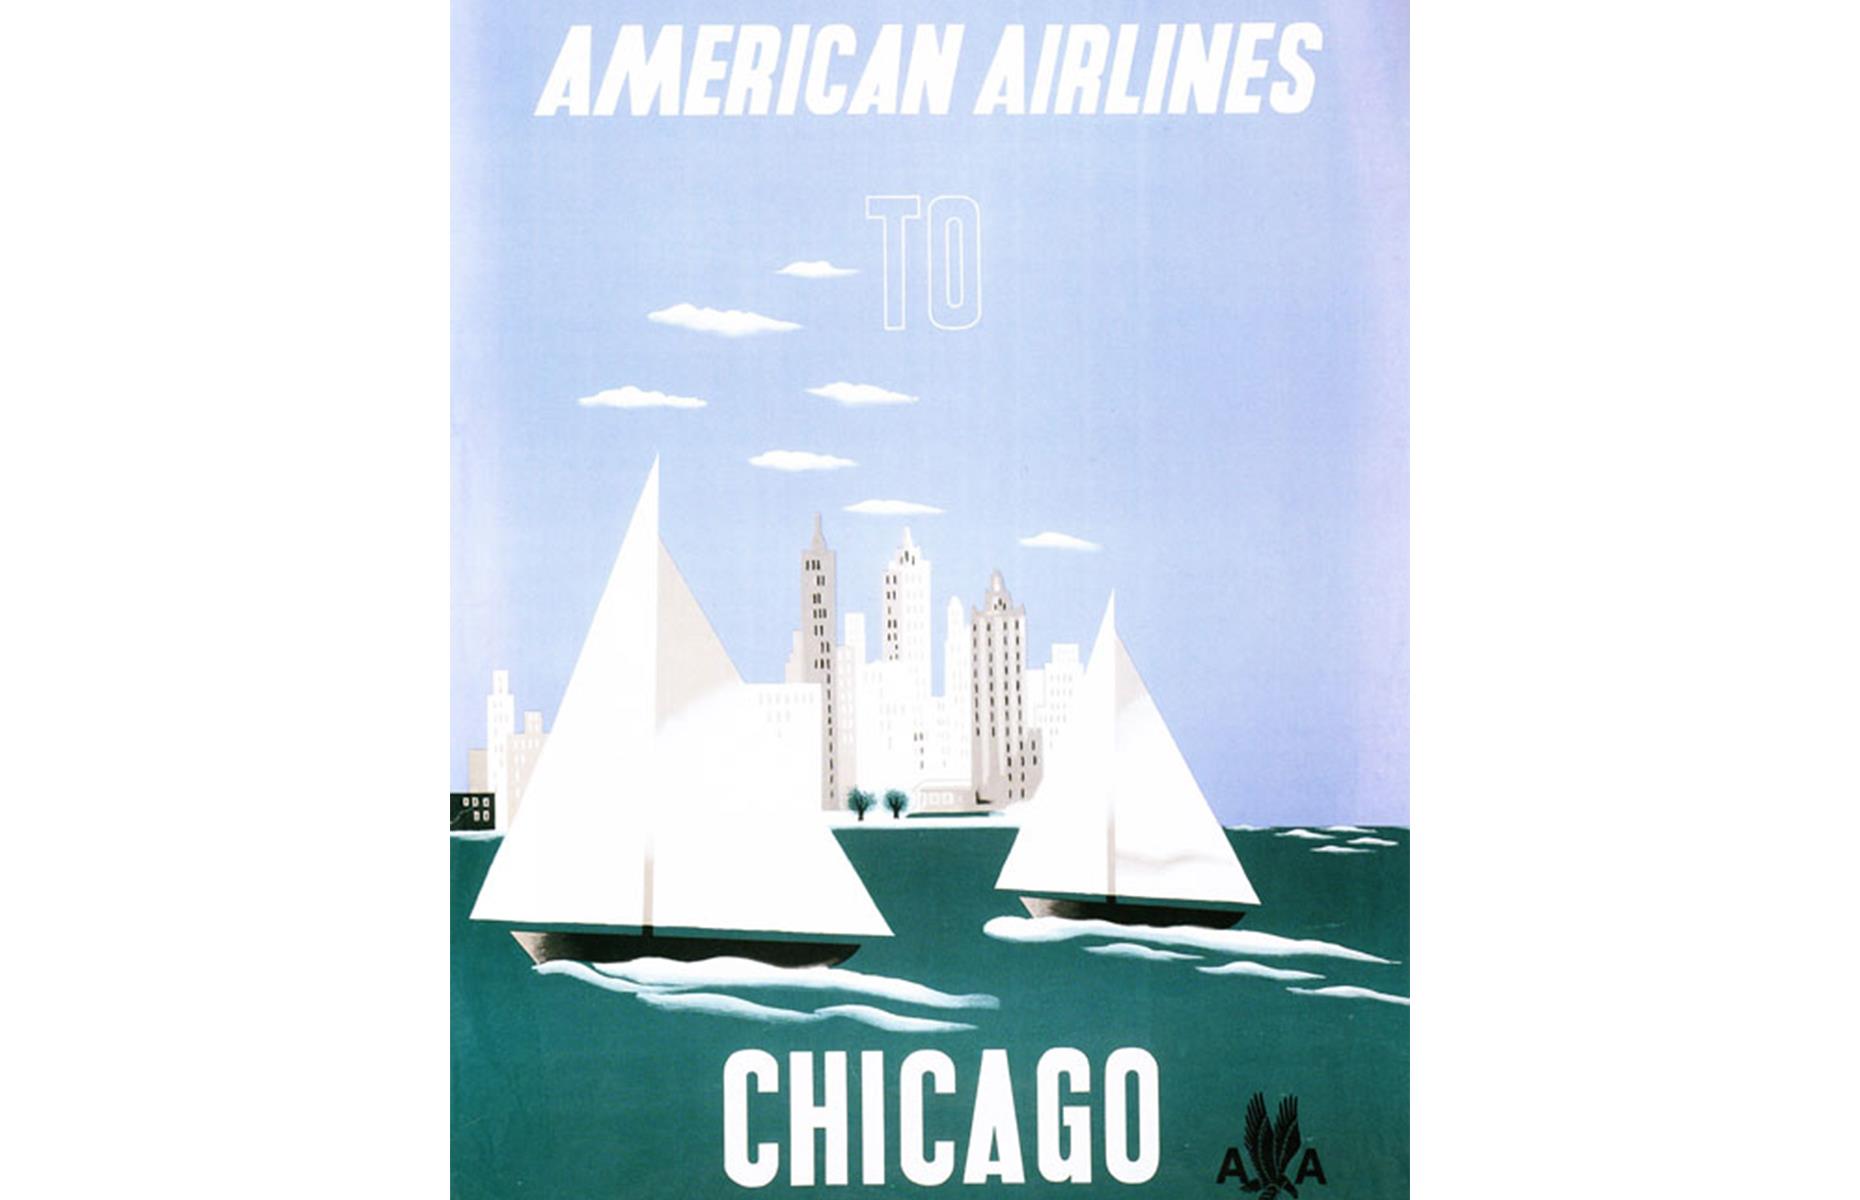 Lake Michigan is the focus of this sleek advert by American Airlines, which dates to the 1950s. The poster lets the pictures do the talking, with bold white sailboats bobbing before Chicago's legendary skyscrapers.